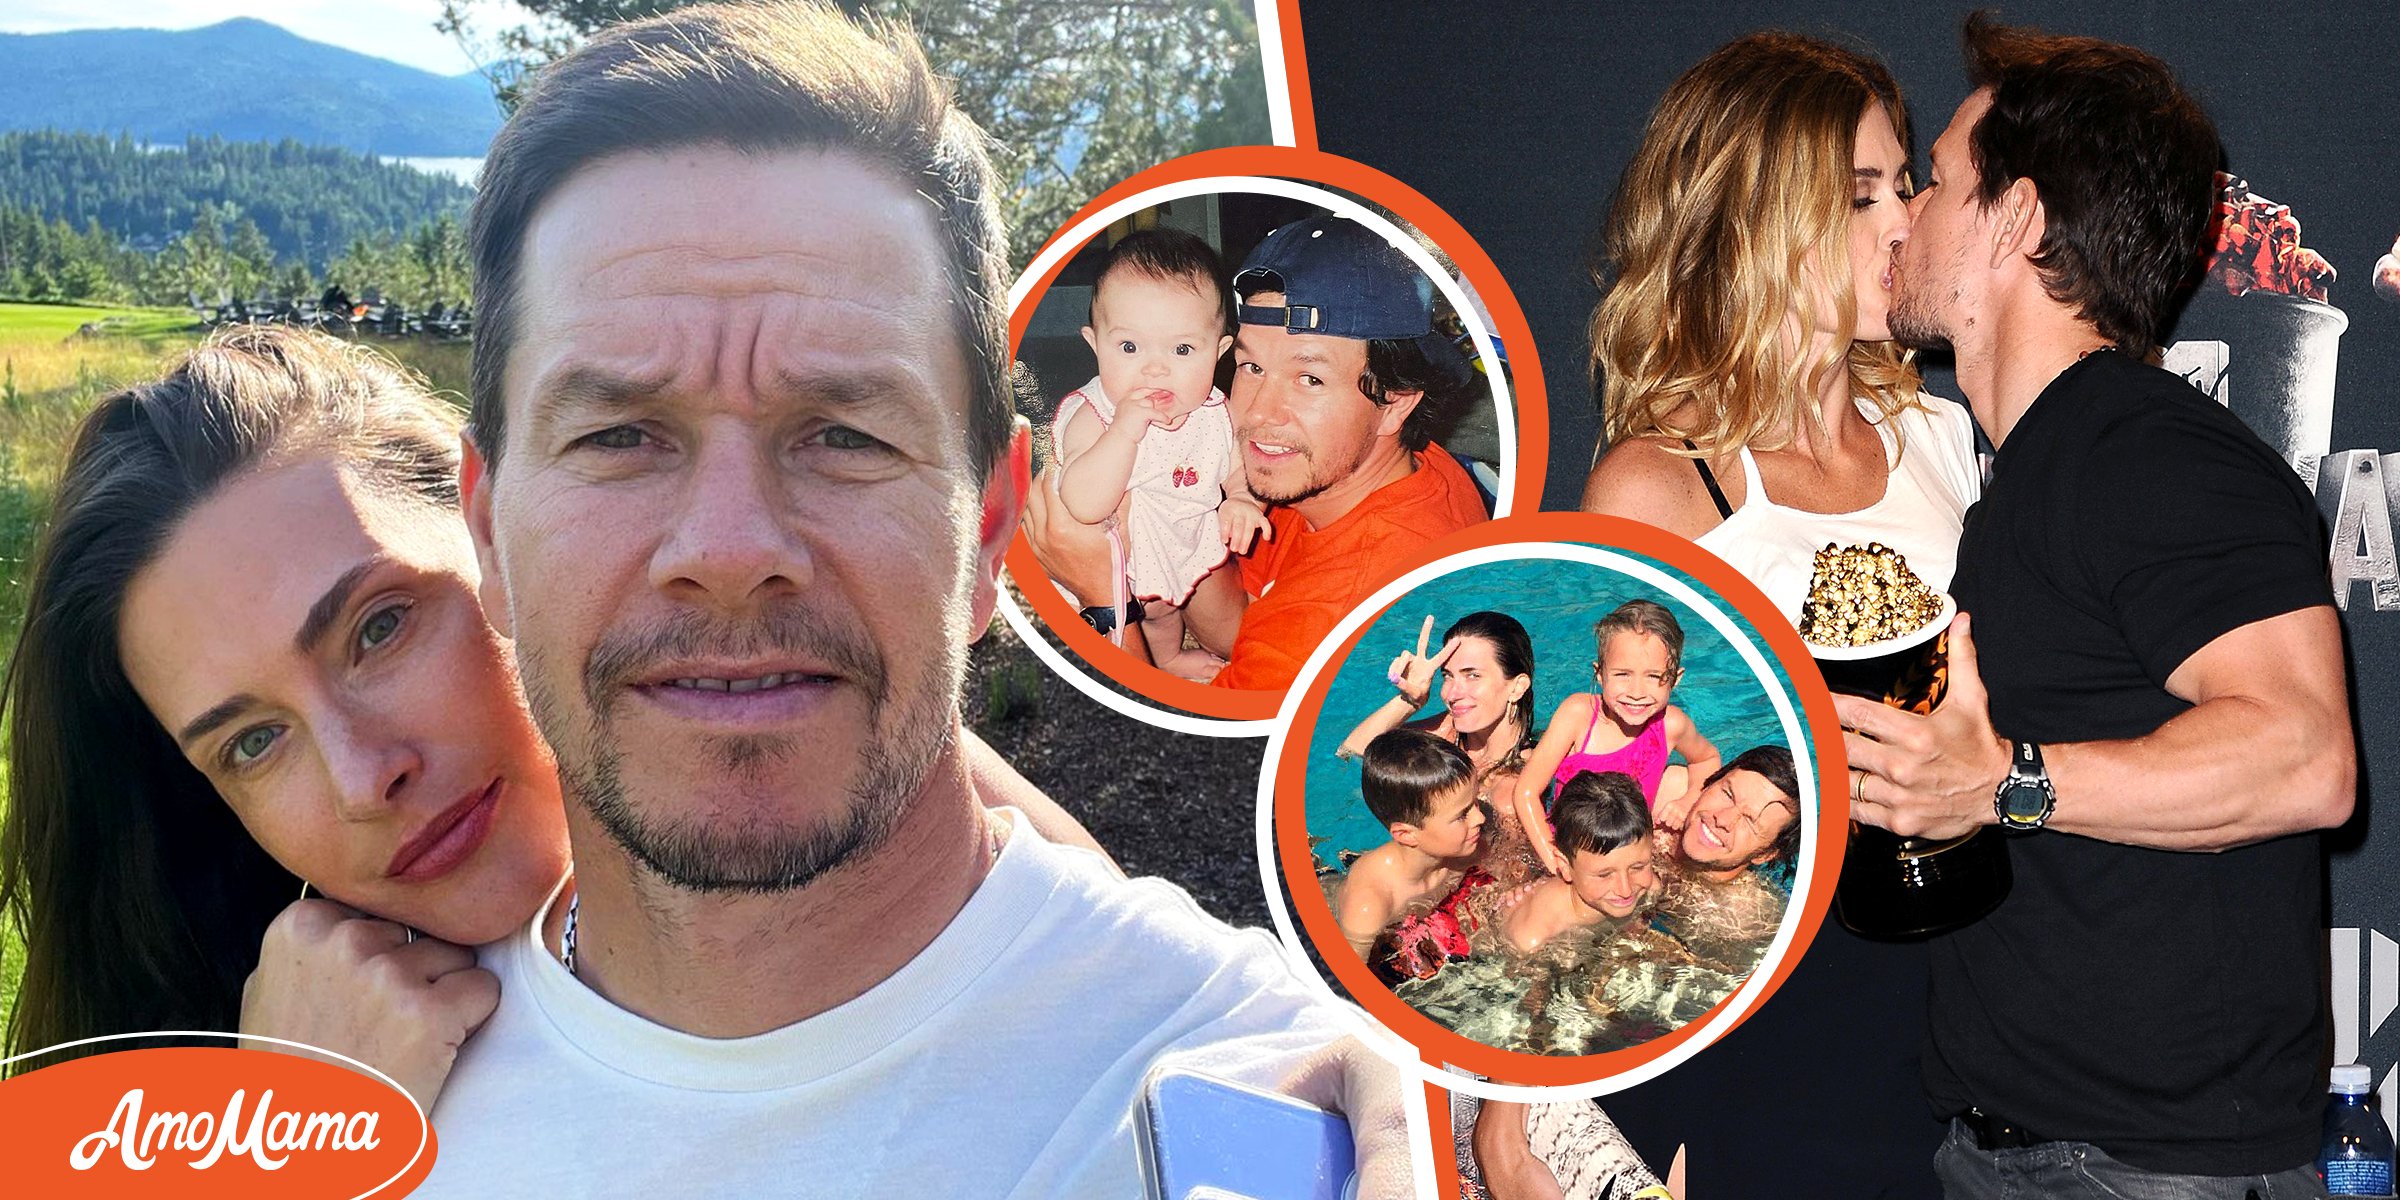 Mark Wahlberg Chooses to Leave Hollywood for the Sake of His 4 Kids